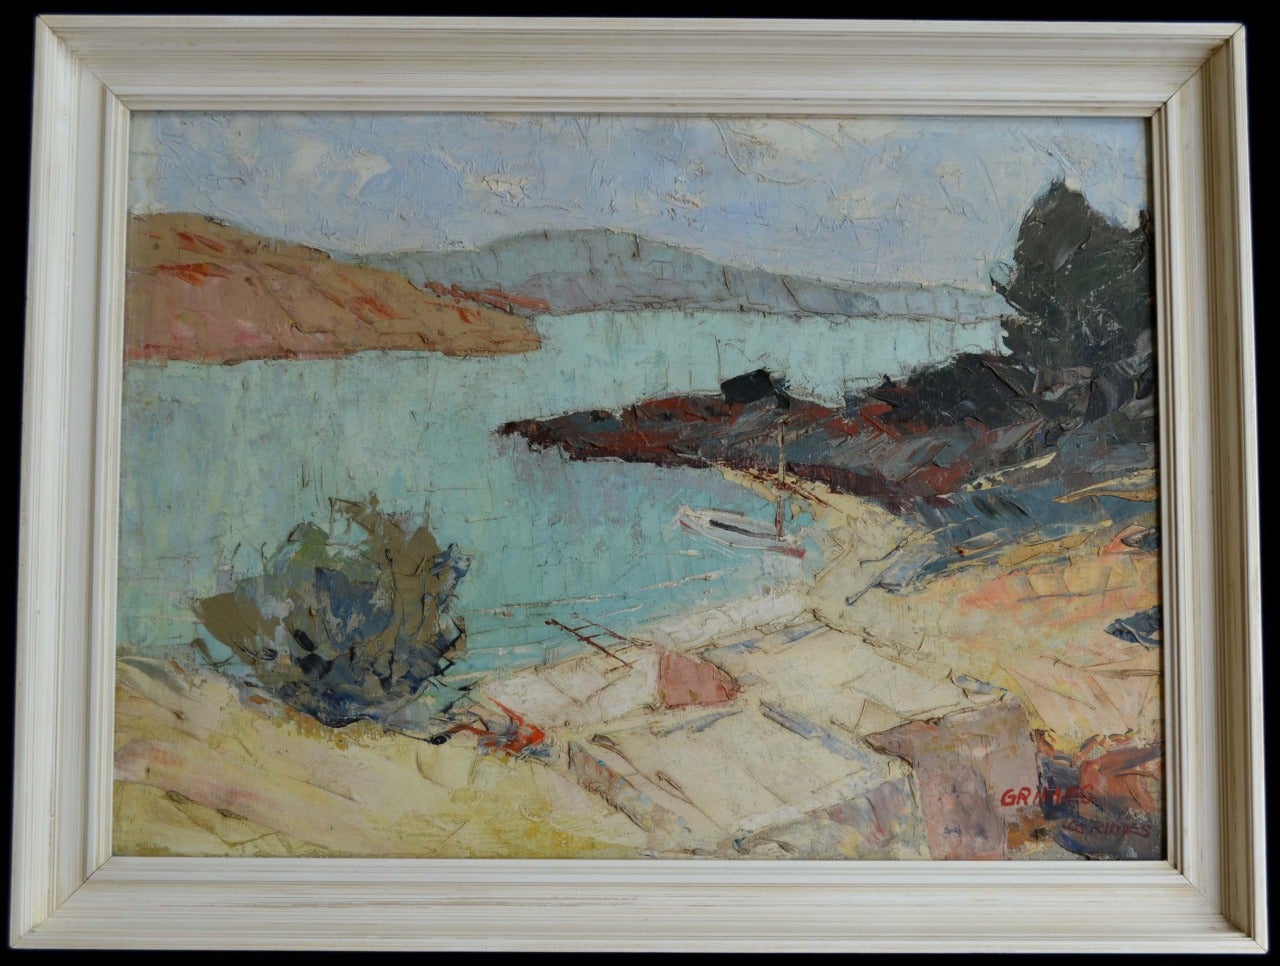 Spanish Cove - Painting by Leslie Grimes